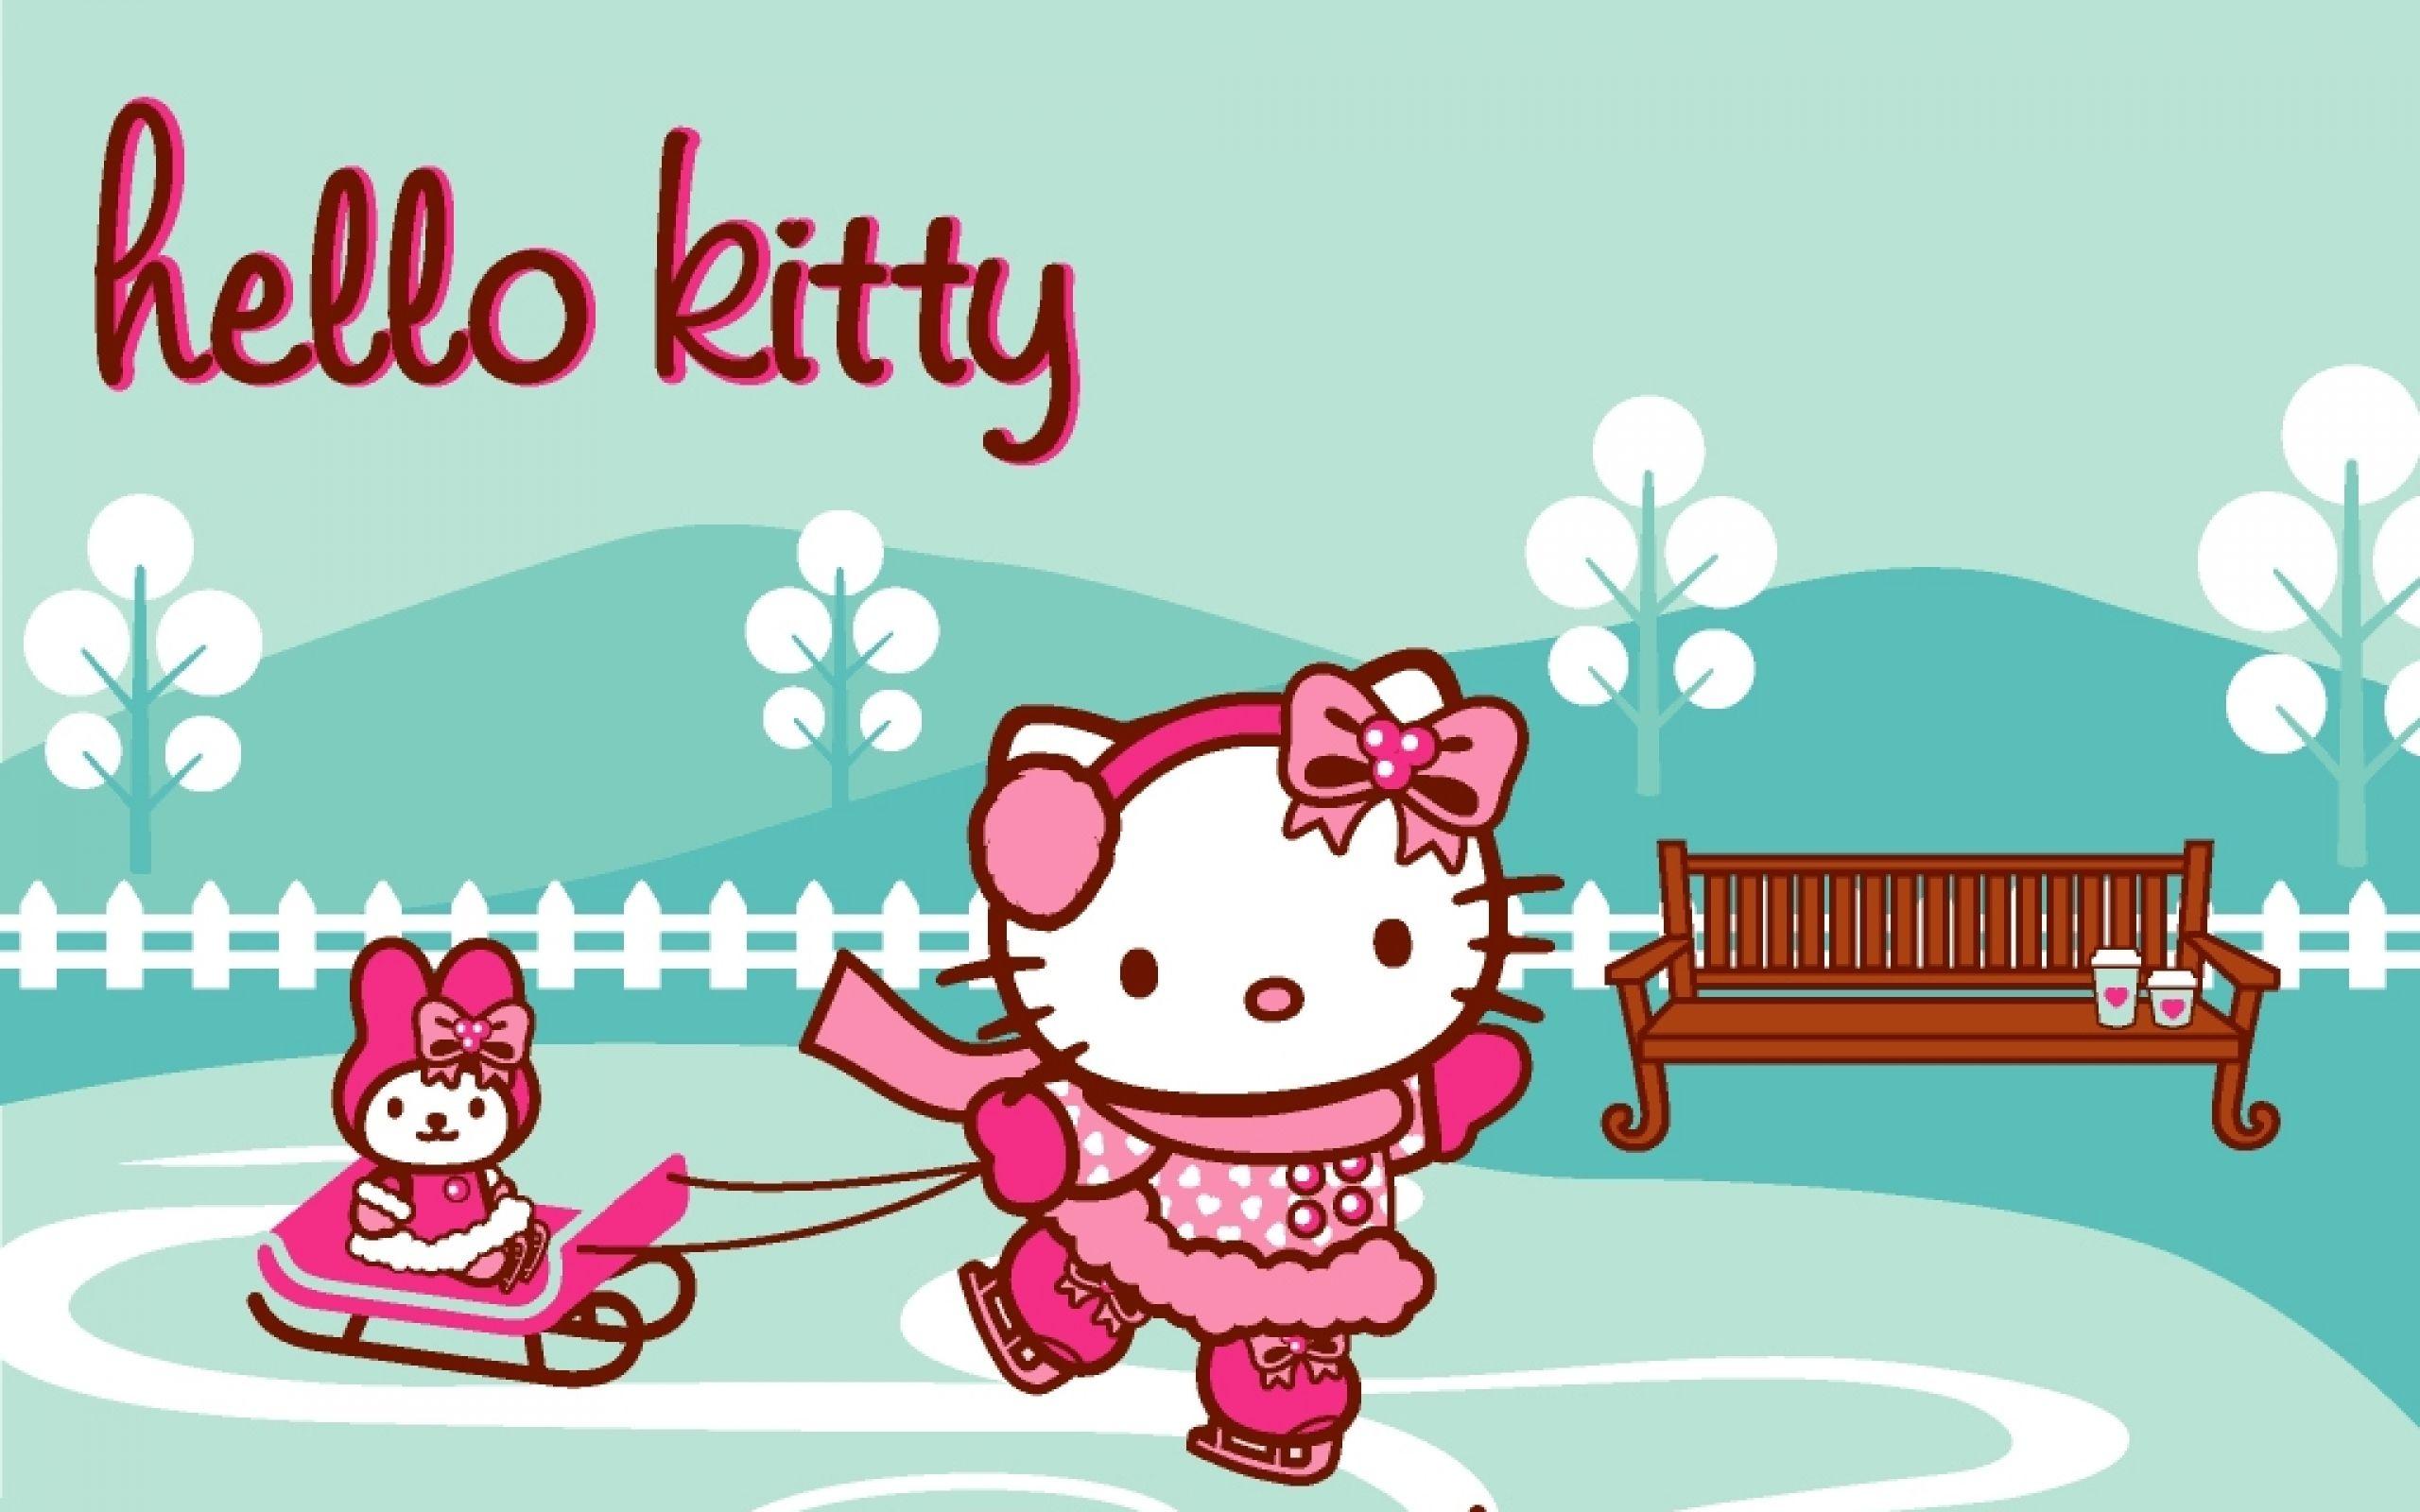 Hello Kitty Face Wallpaper Desktop with Floral Pink Background